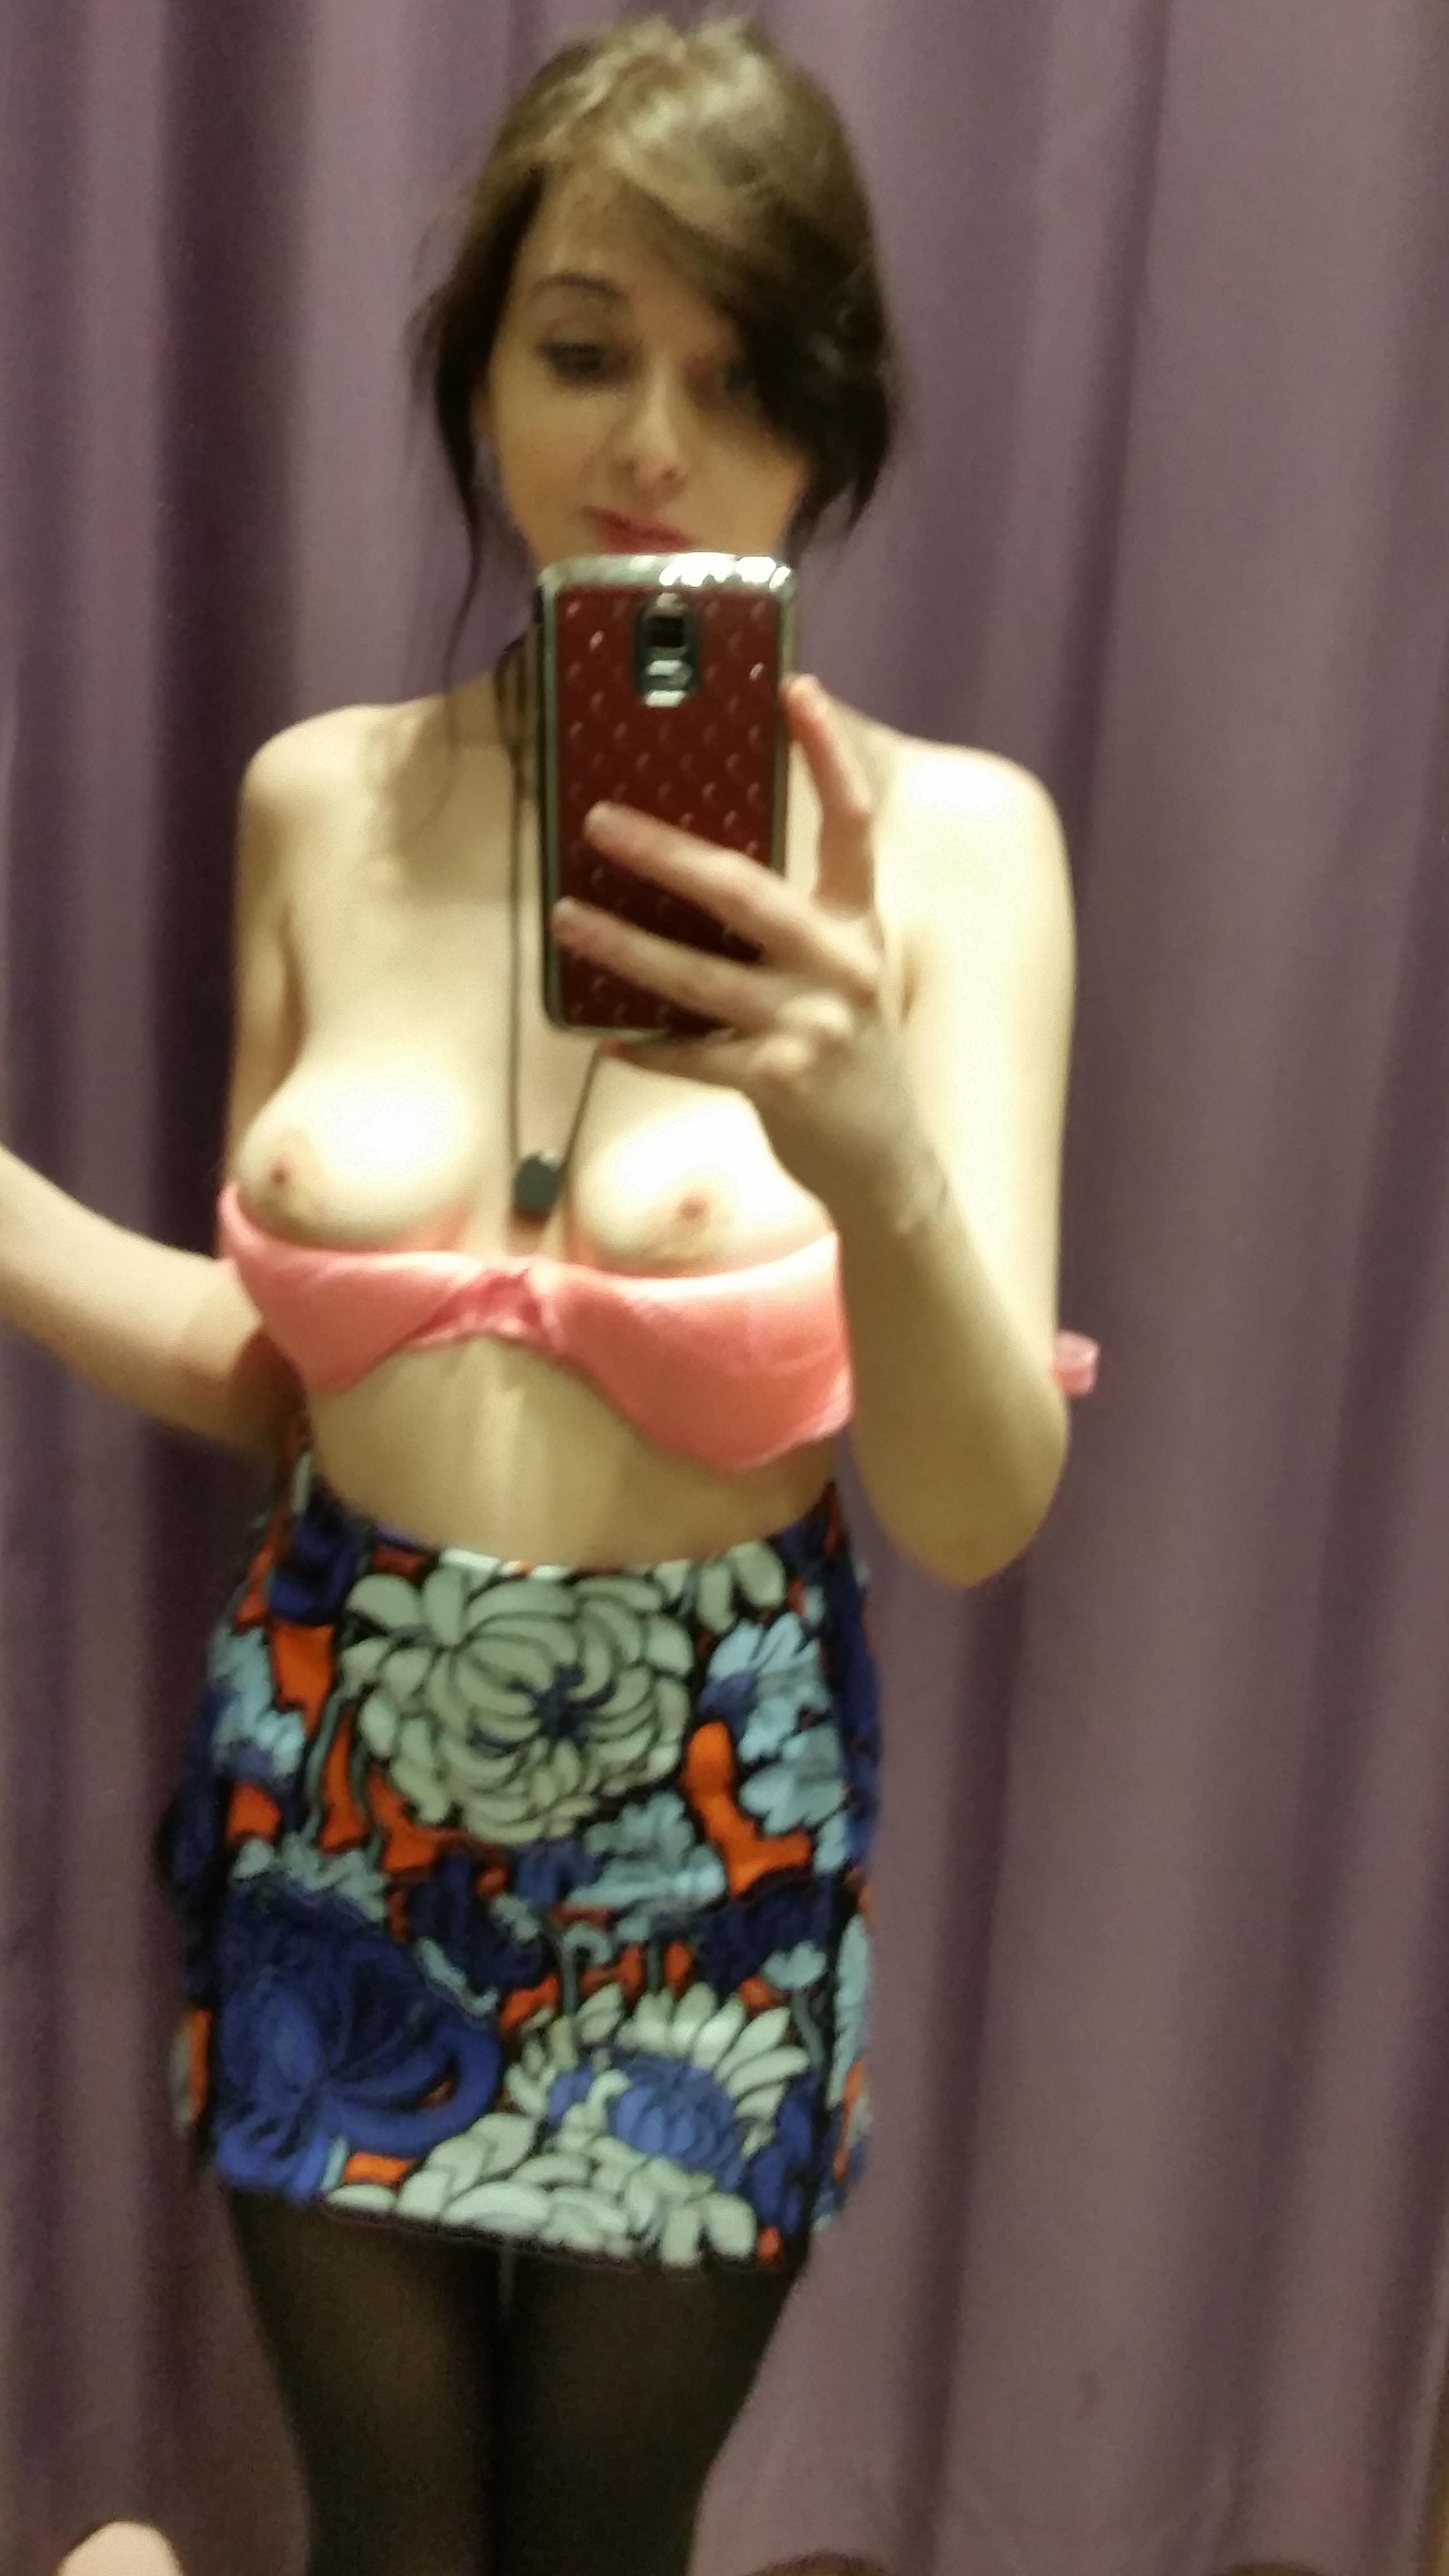 Changing room Porn